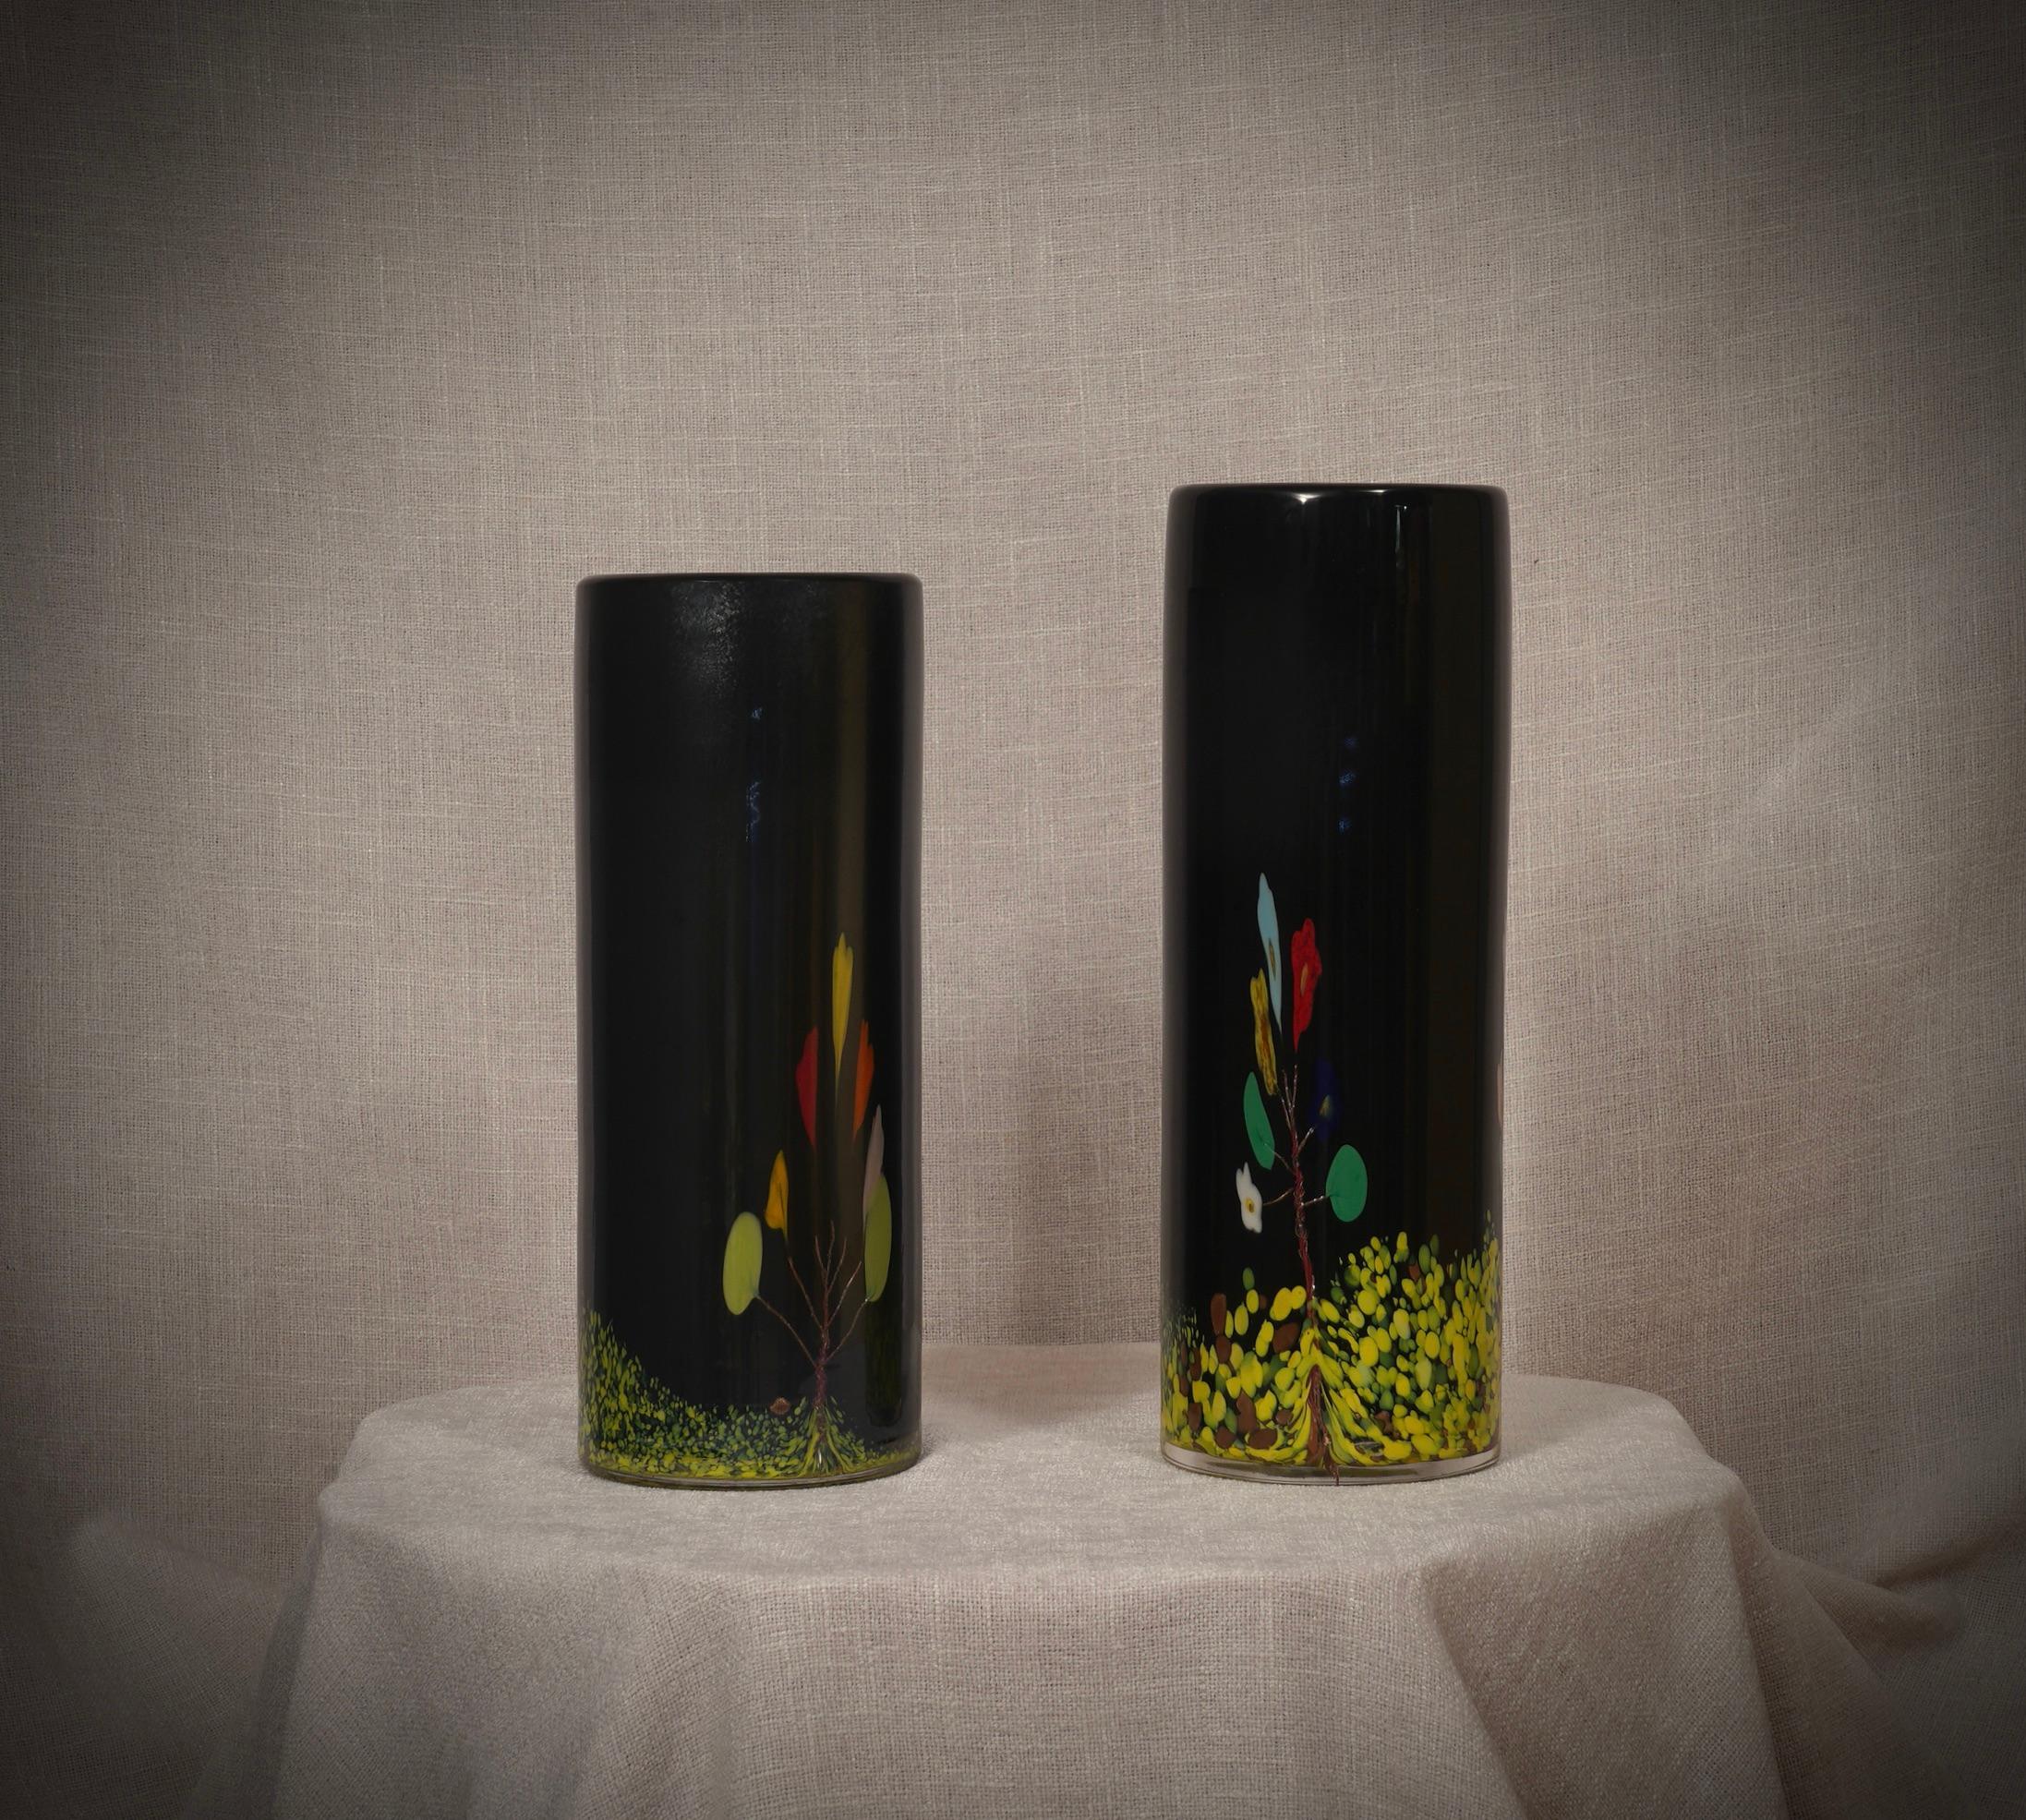 Fantastic vase from the Murano glassworks, both for its particular workmanship and for the colour, in fact the vase is black but has other colors internally to form a design of a tree with flowers. The Murano furnaces create an indisputable timeless